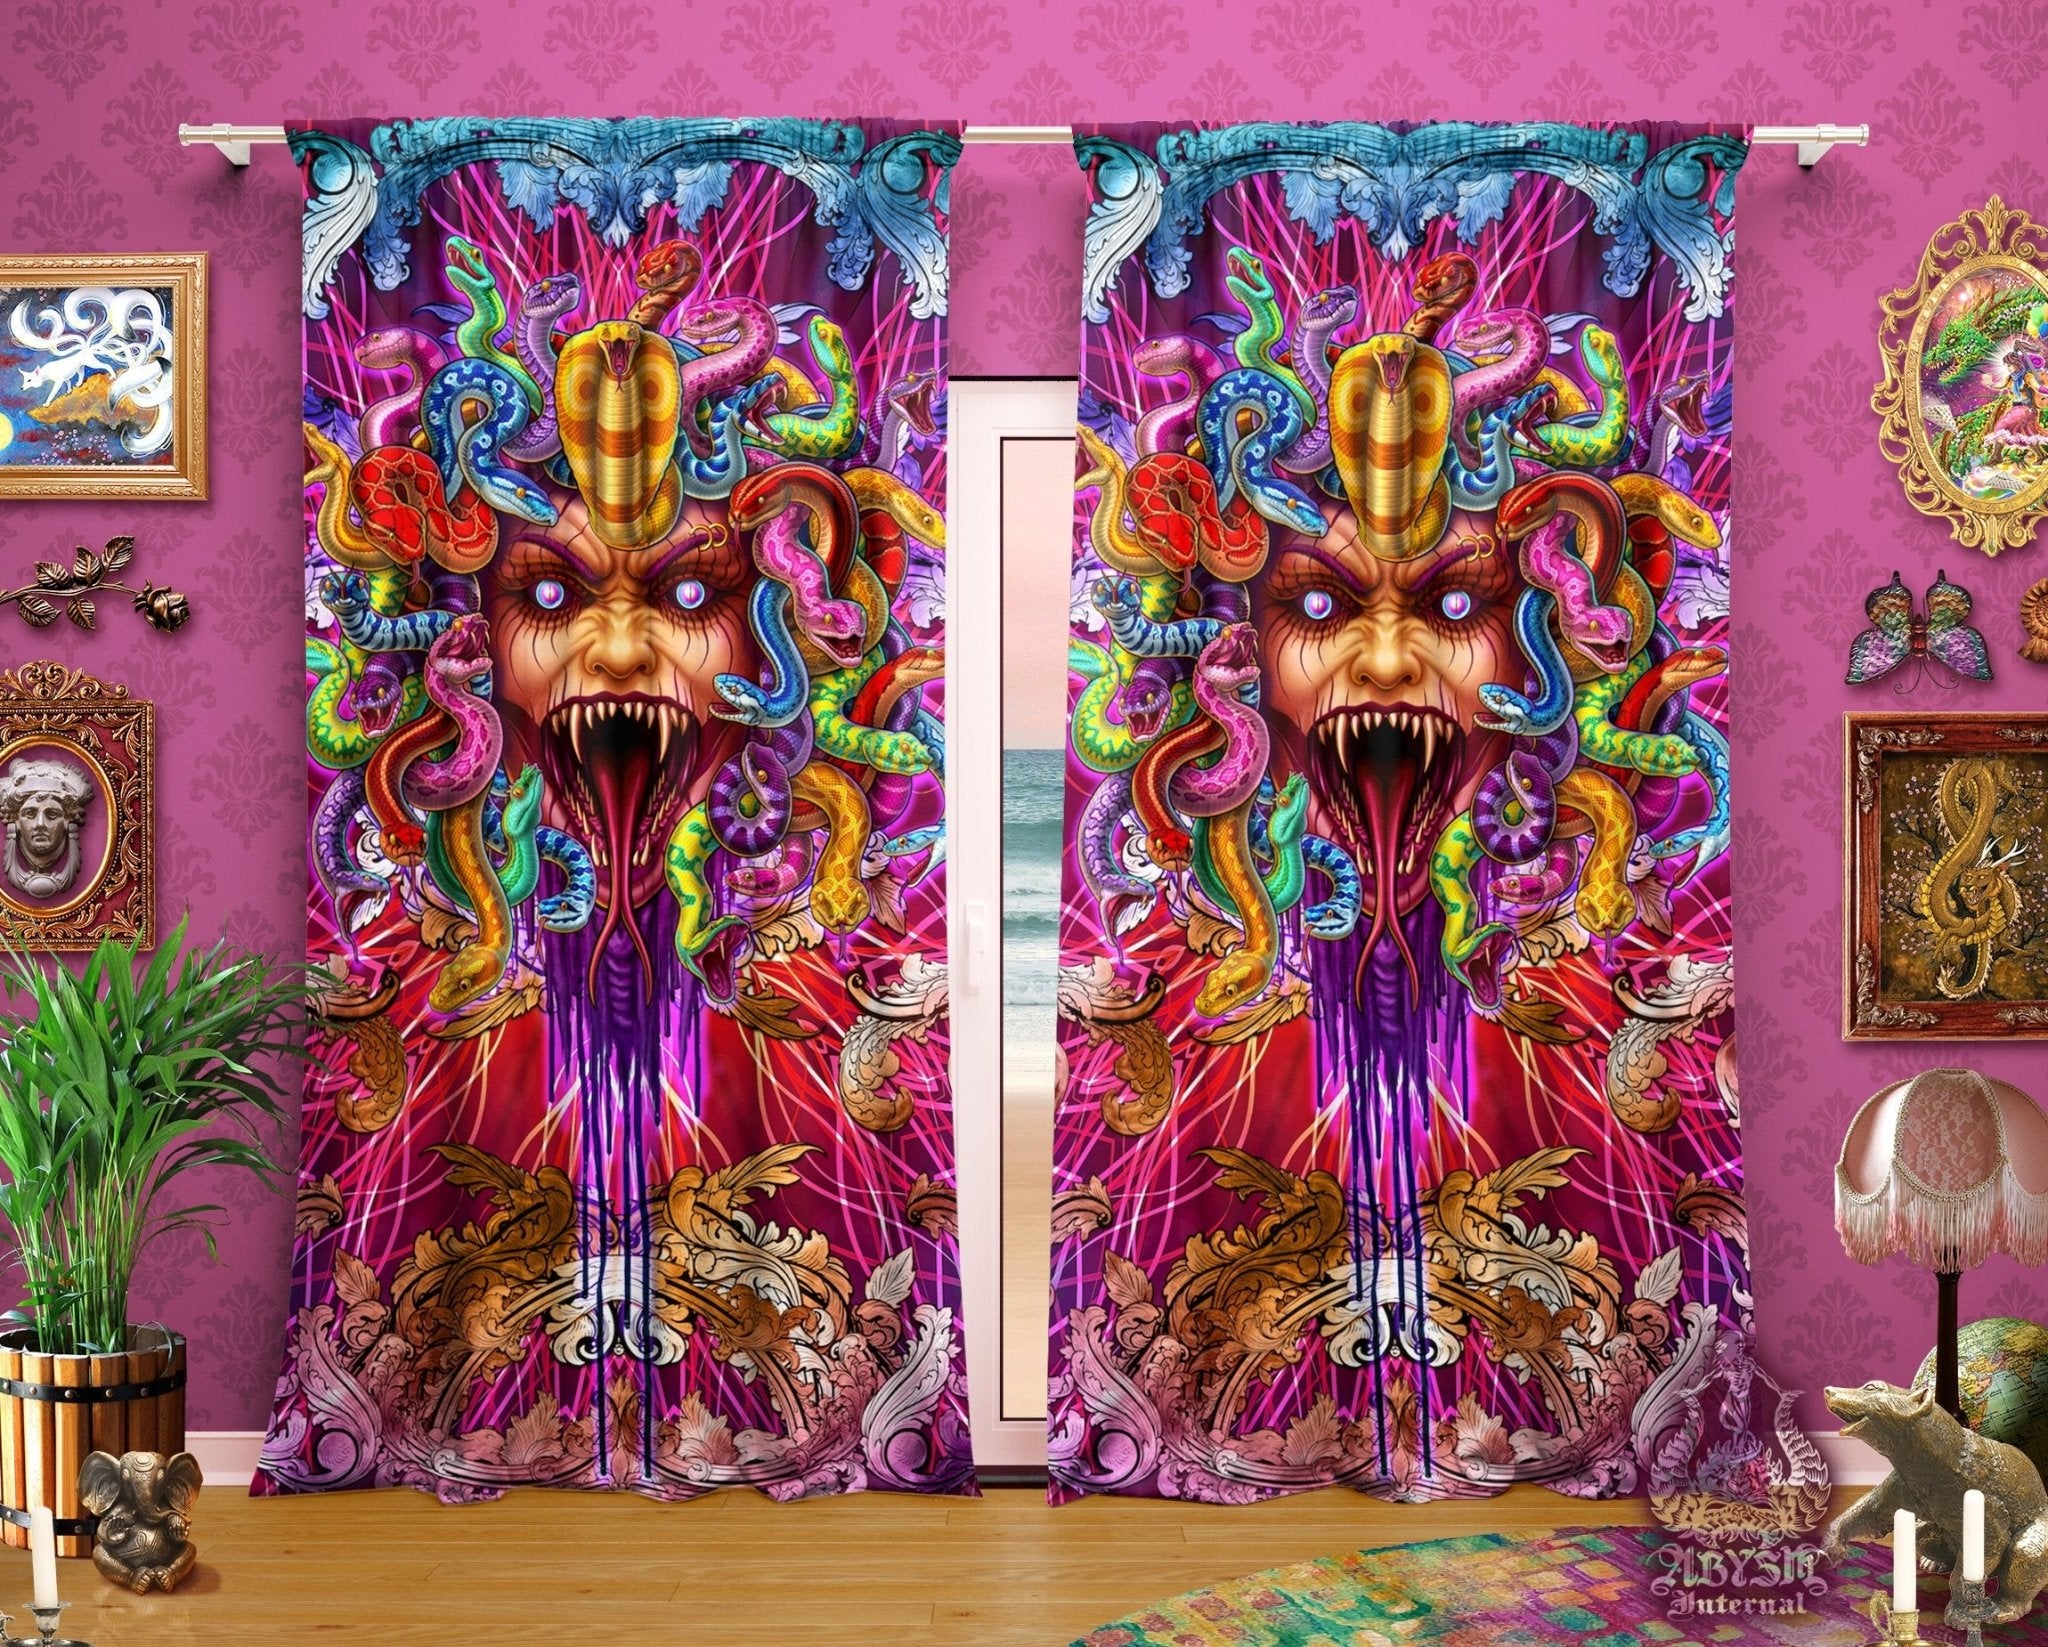 Psychedelic Blackout Curtains, Long Window Panels, Psy Art Print, Trippy and Indie Room Decor - Rainbow Medusa & Snakes, Enraged - Abysm Internal